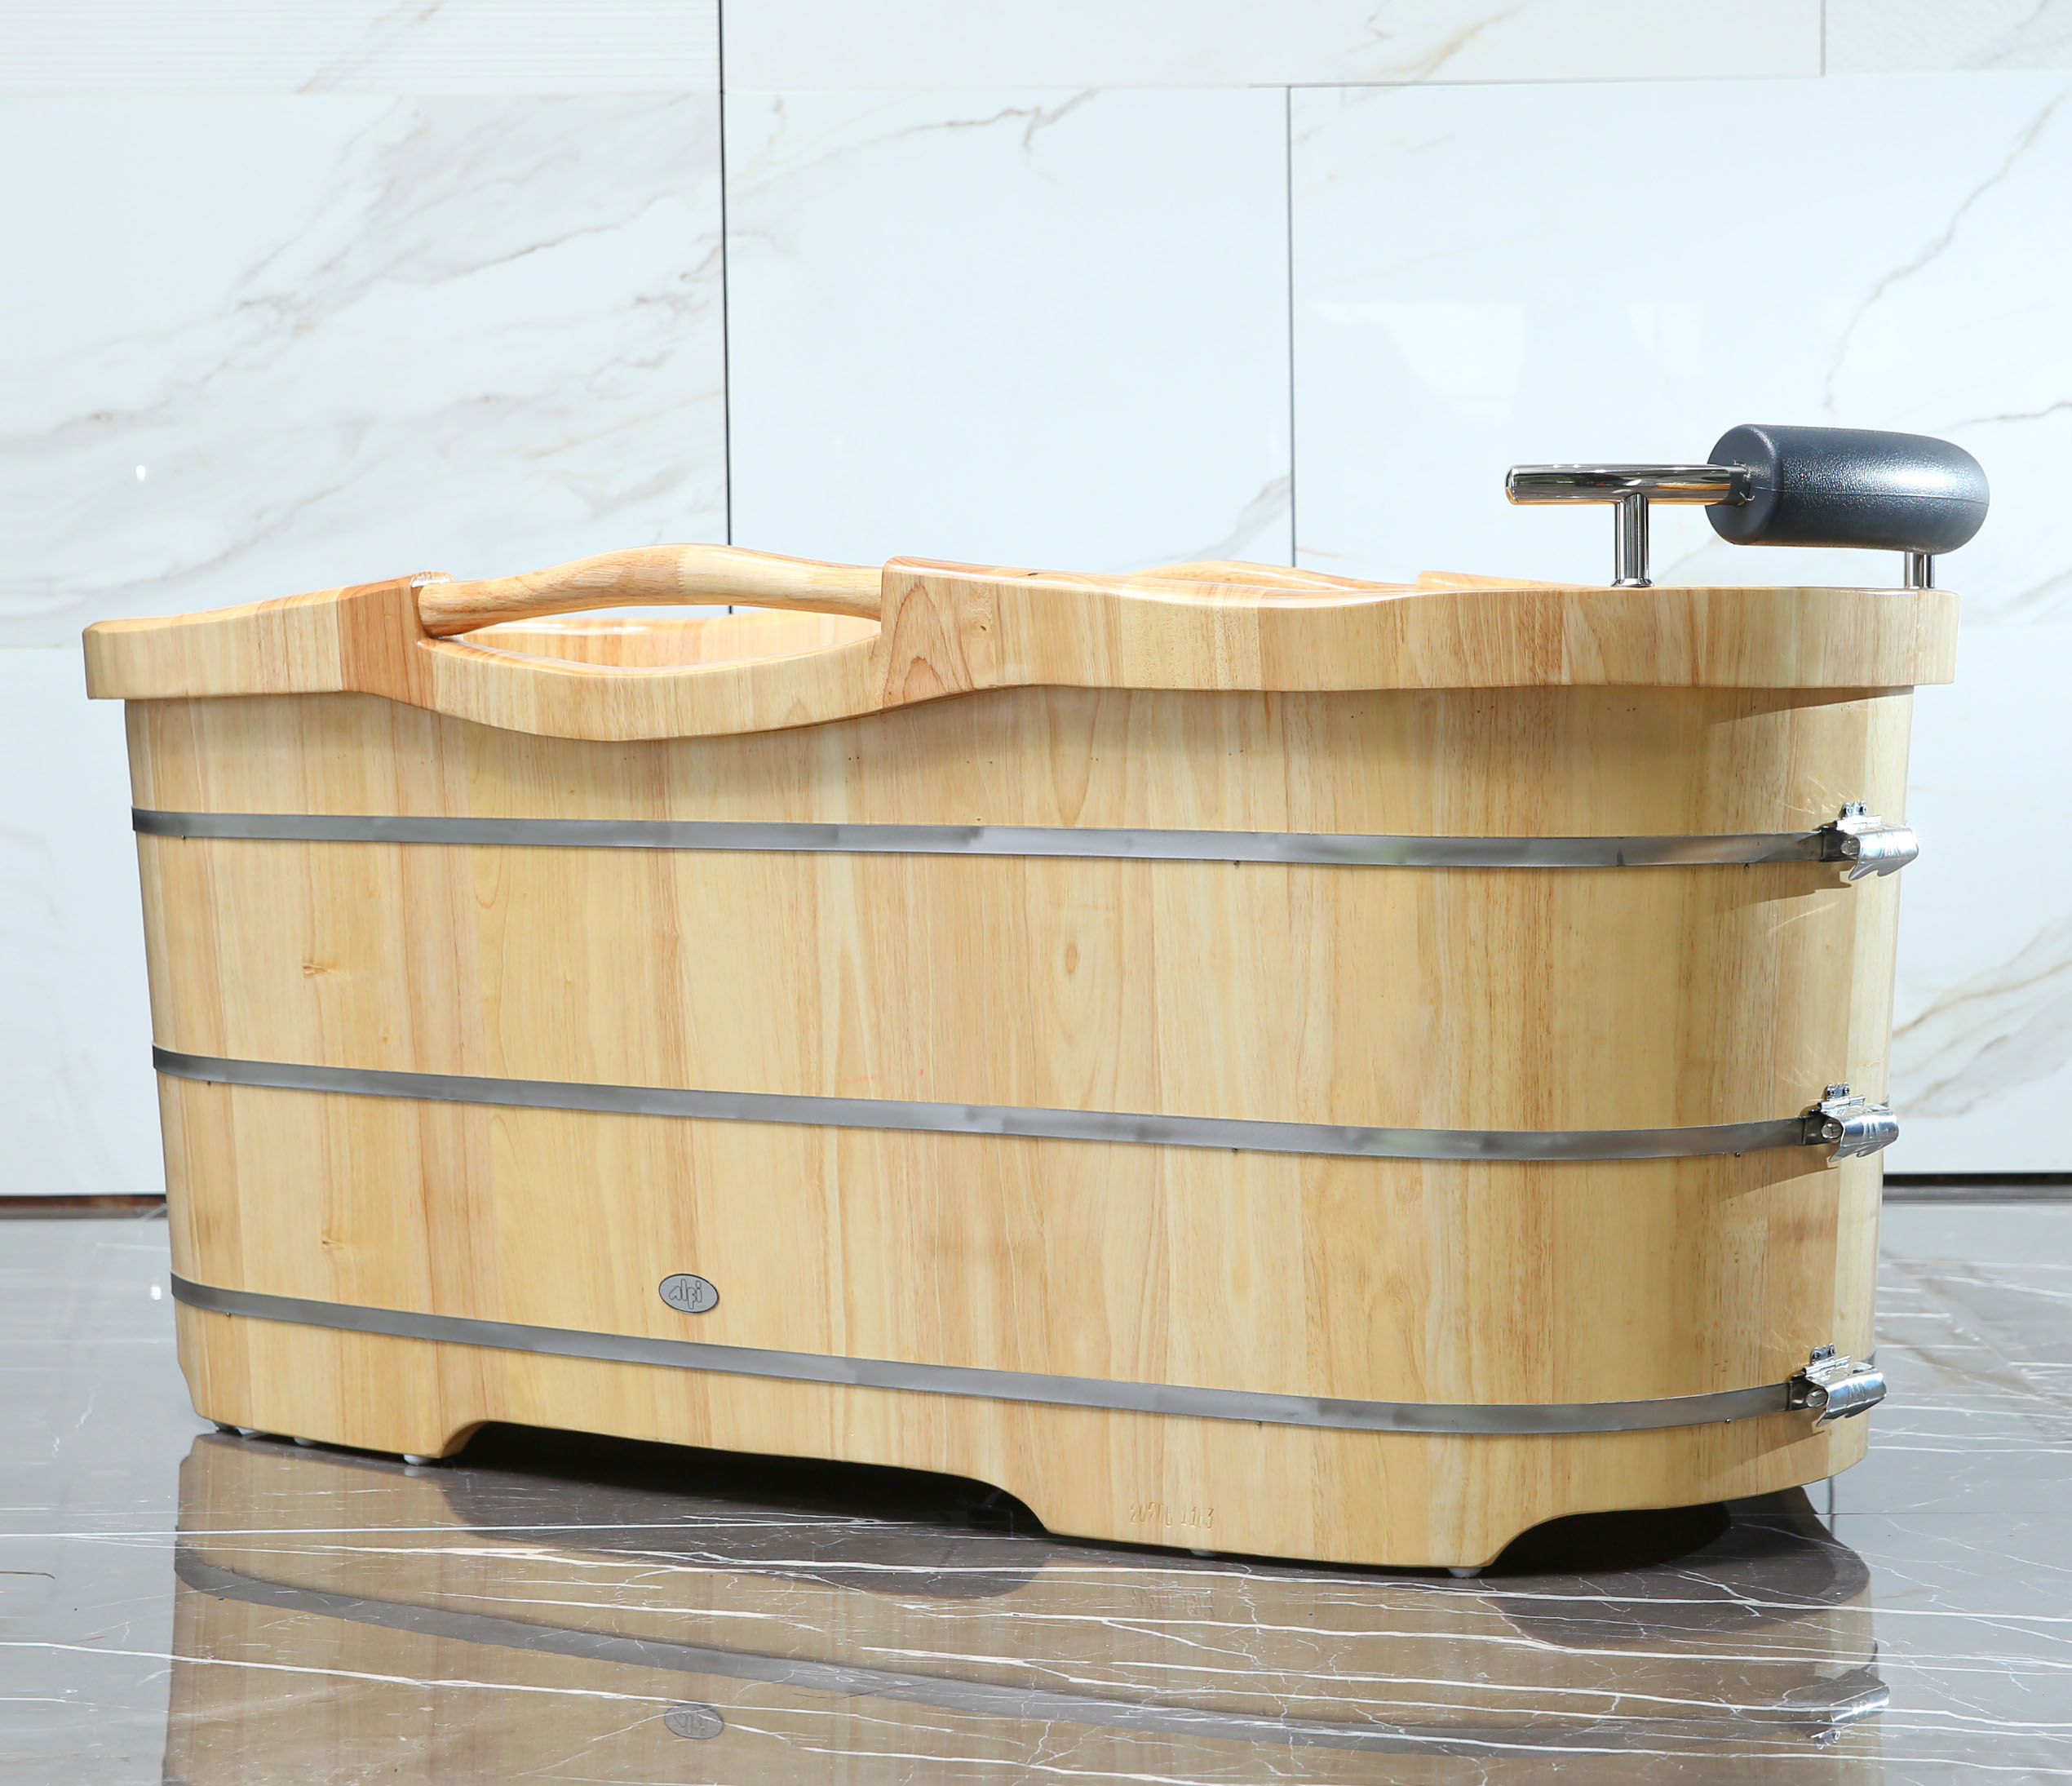 Picture of ALFI brand AB1163 AB1163 61&amp;apos;&amp;apos; Free Standing Oak Wood Bath with Cusion Headrest - Natural Wood